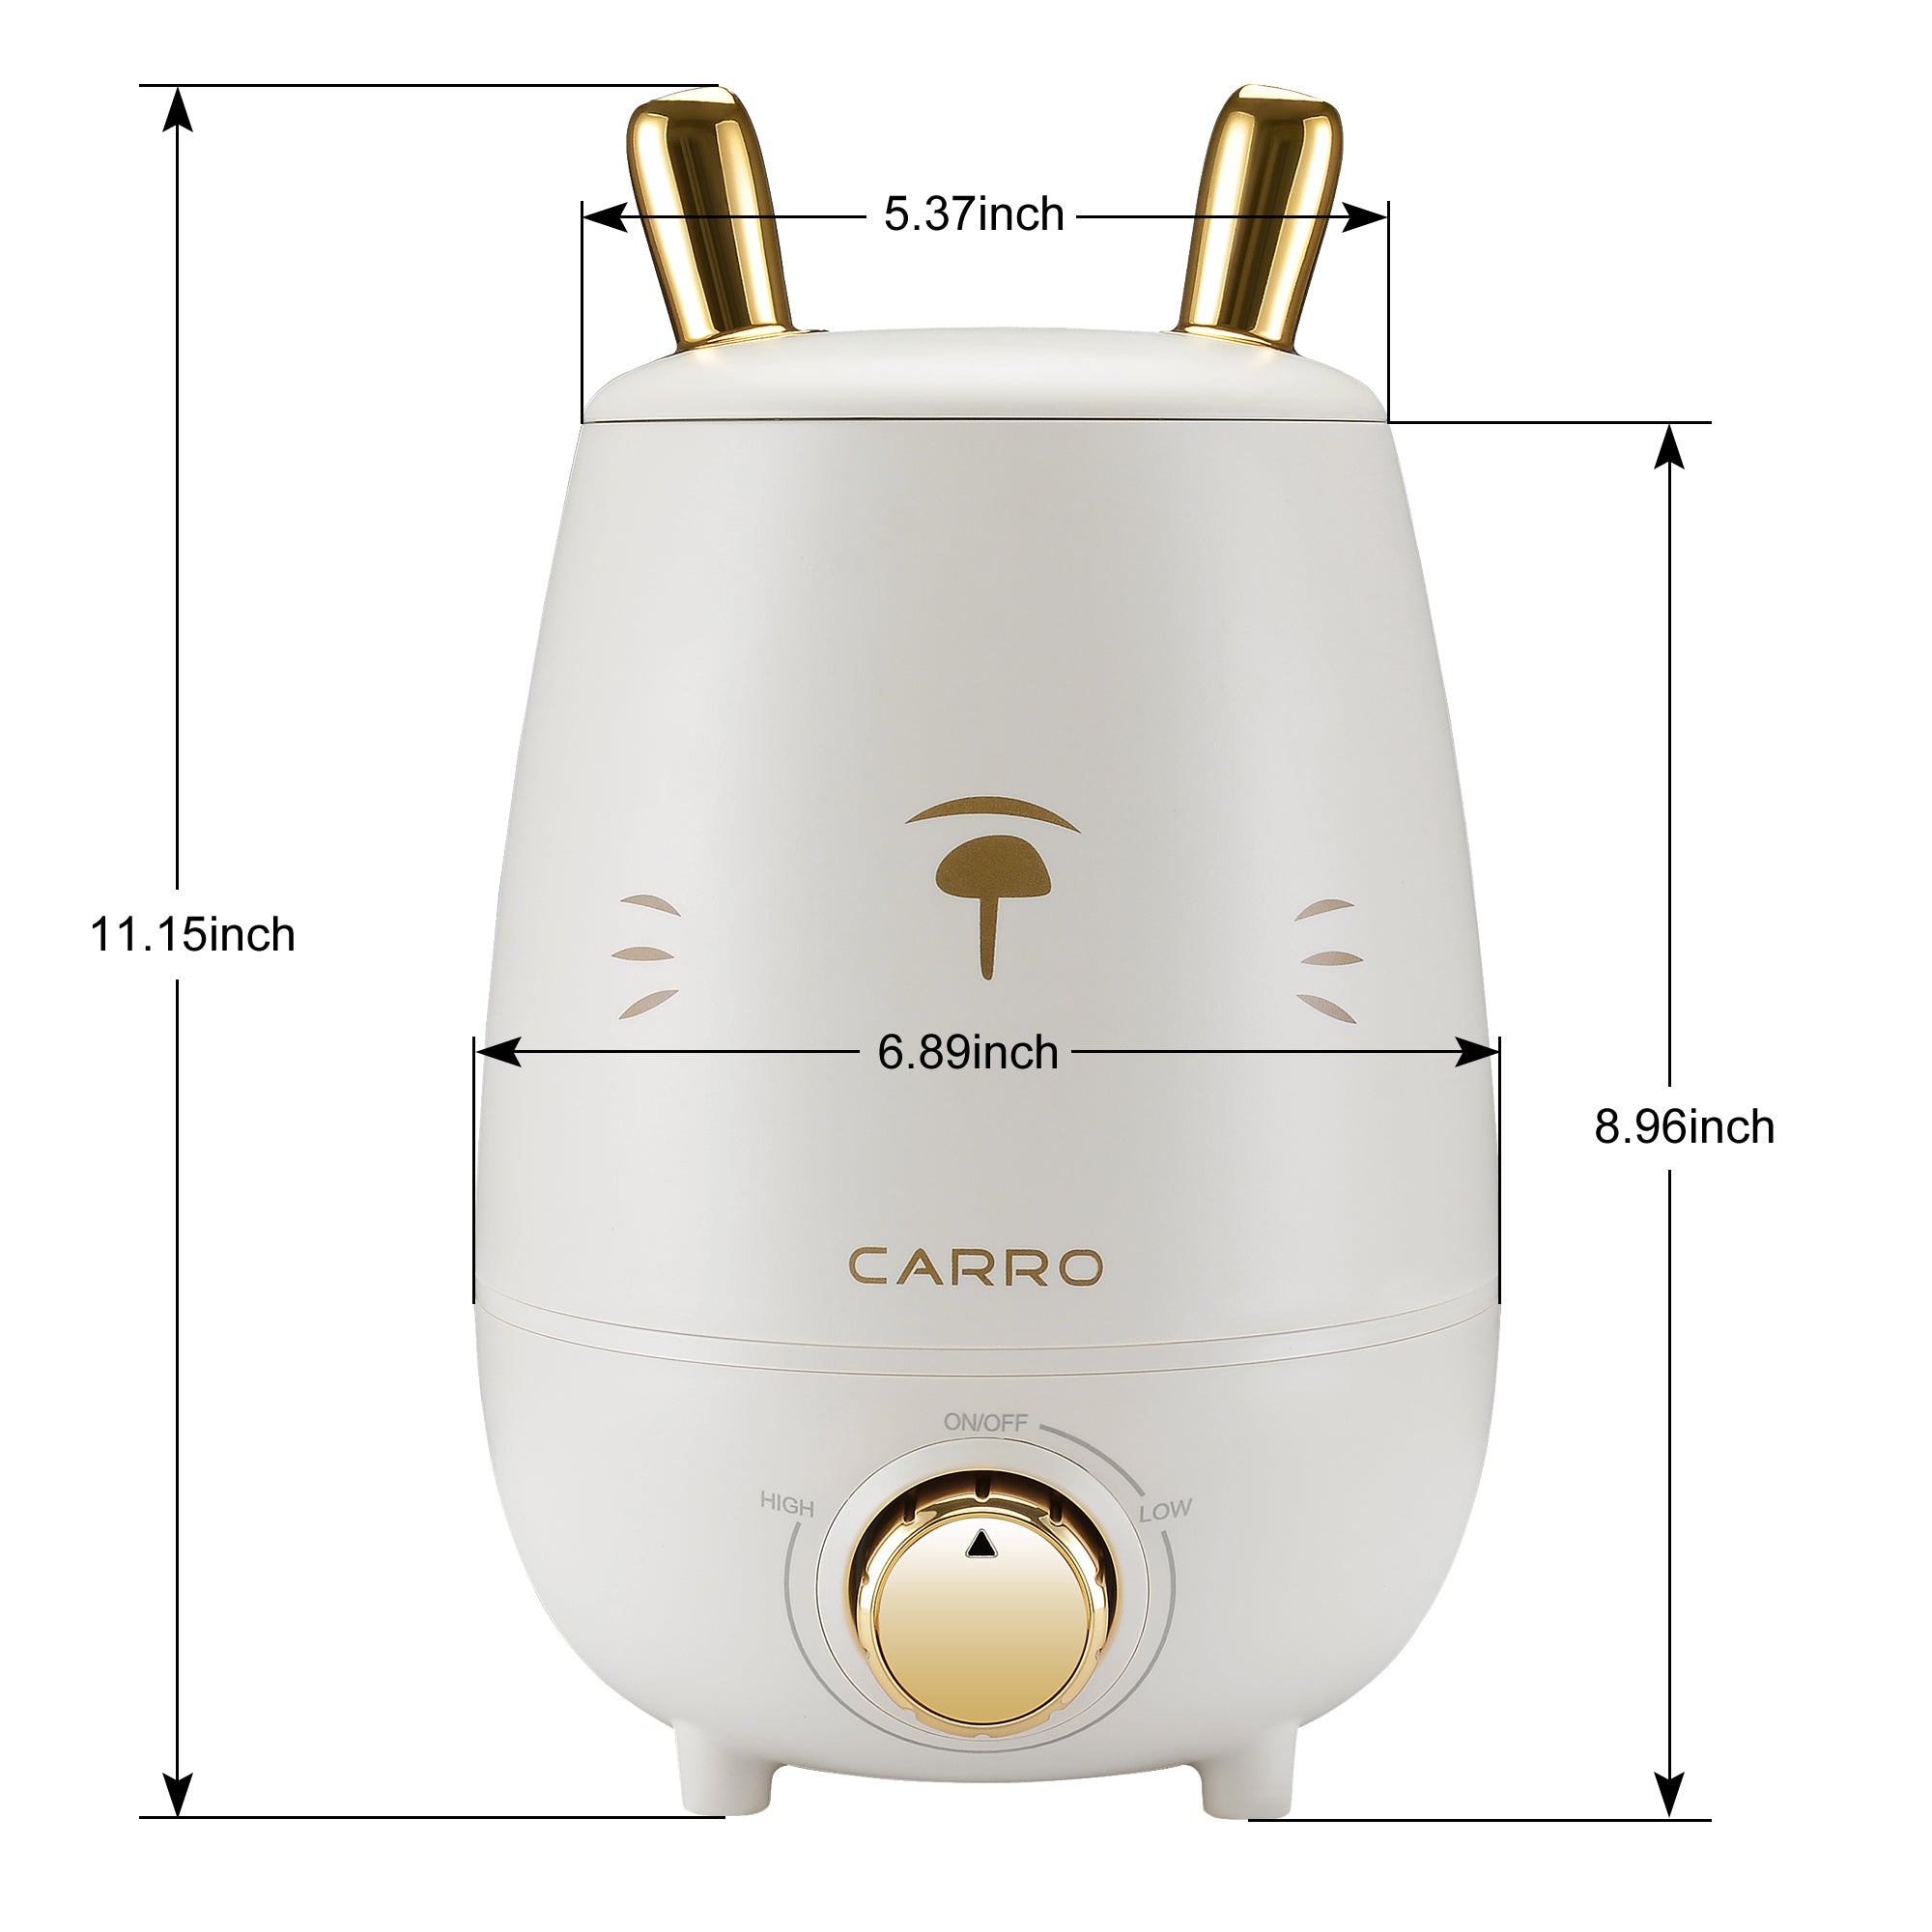 The humidifier is equipped with double lovely bunny-ear-shape Atomization Outlets and variable mist control rotary switch. A low water indicator light lets you know when it&#39;s time to refill the water tank. Carro humidifier creates a better home environment for those suffering from colds, allergies and dry skin.